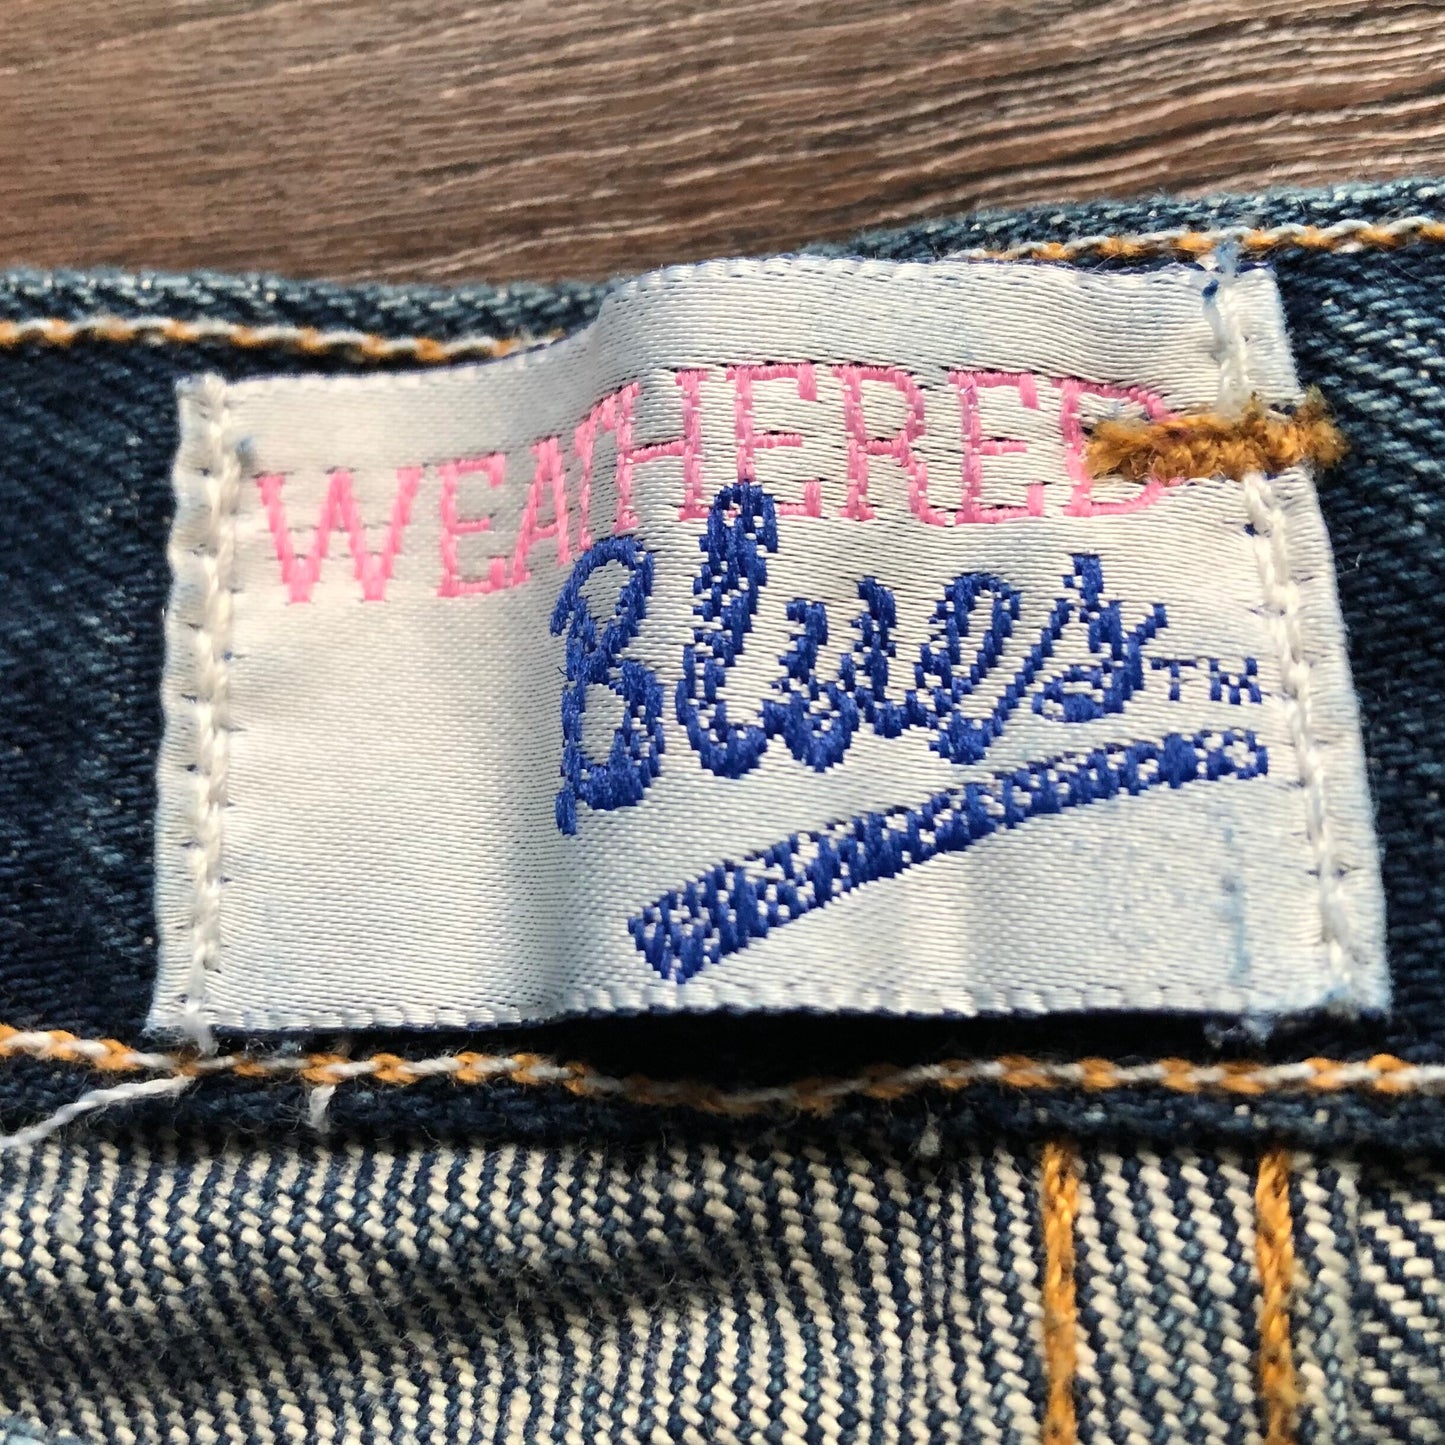 80’s Vintage Women’s Weathered Blues High Waisted Jeans with Patch on Back Pocket